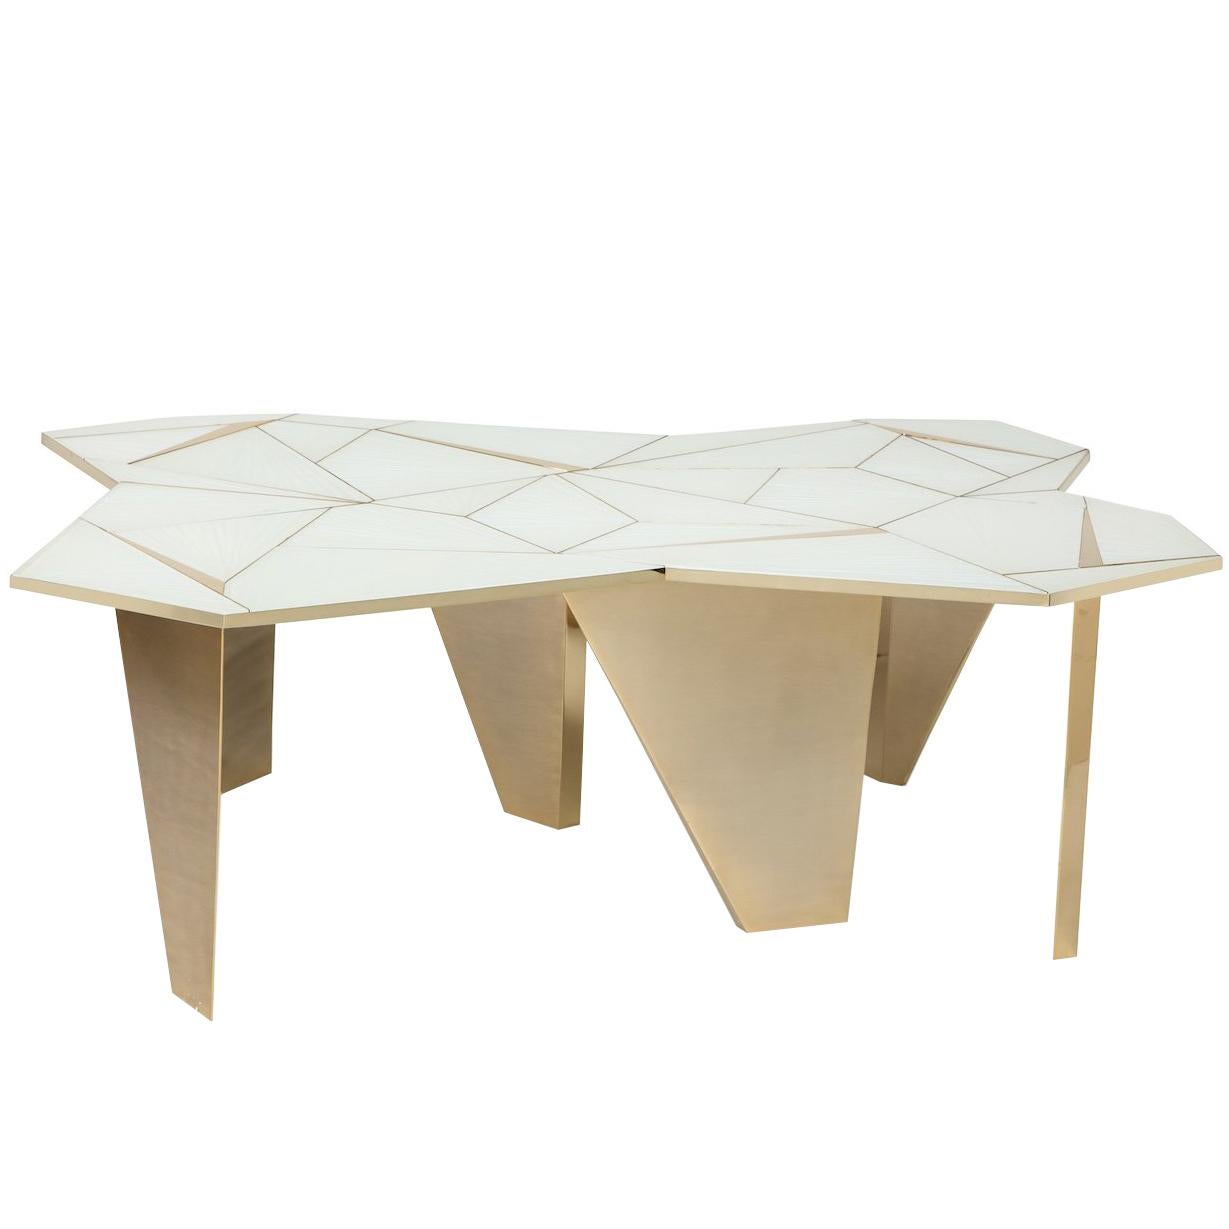 "Artide, " Limited-Edition Low Table by Ghiró Studios